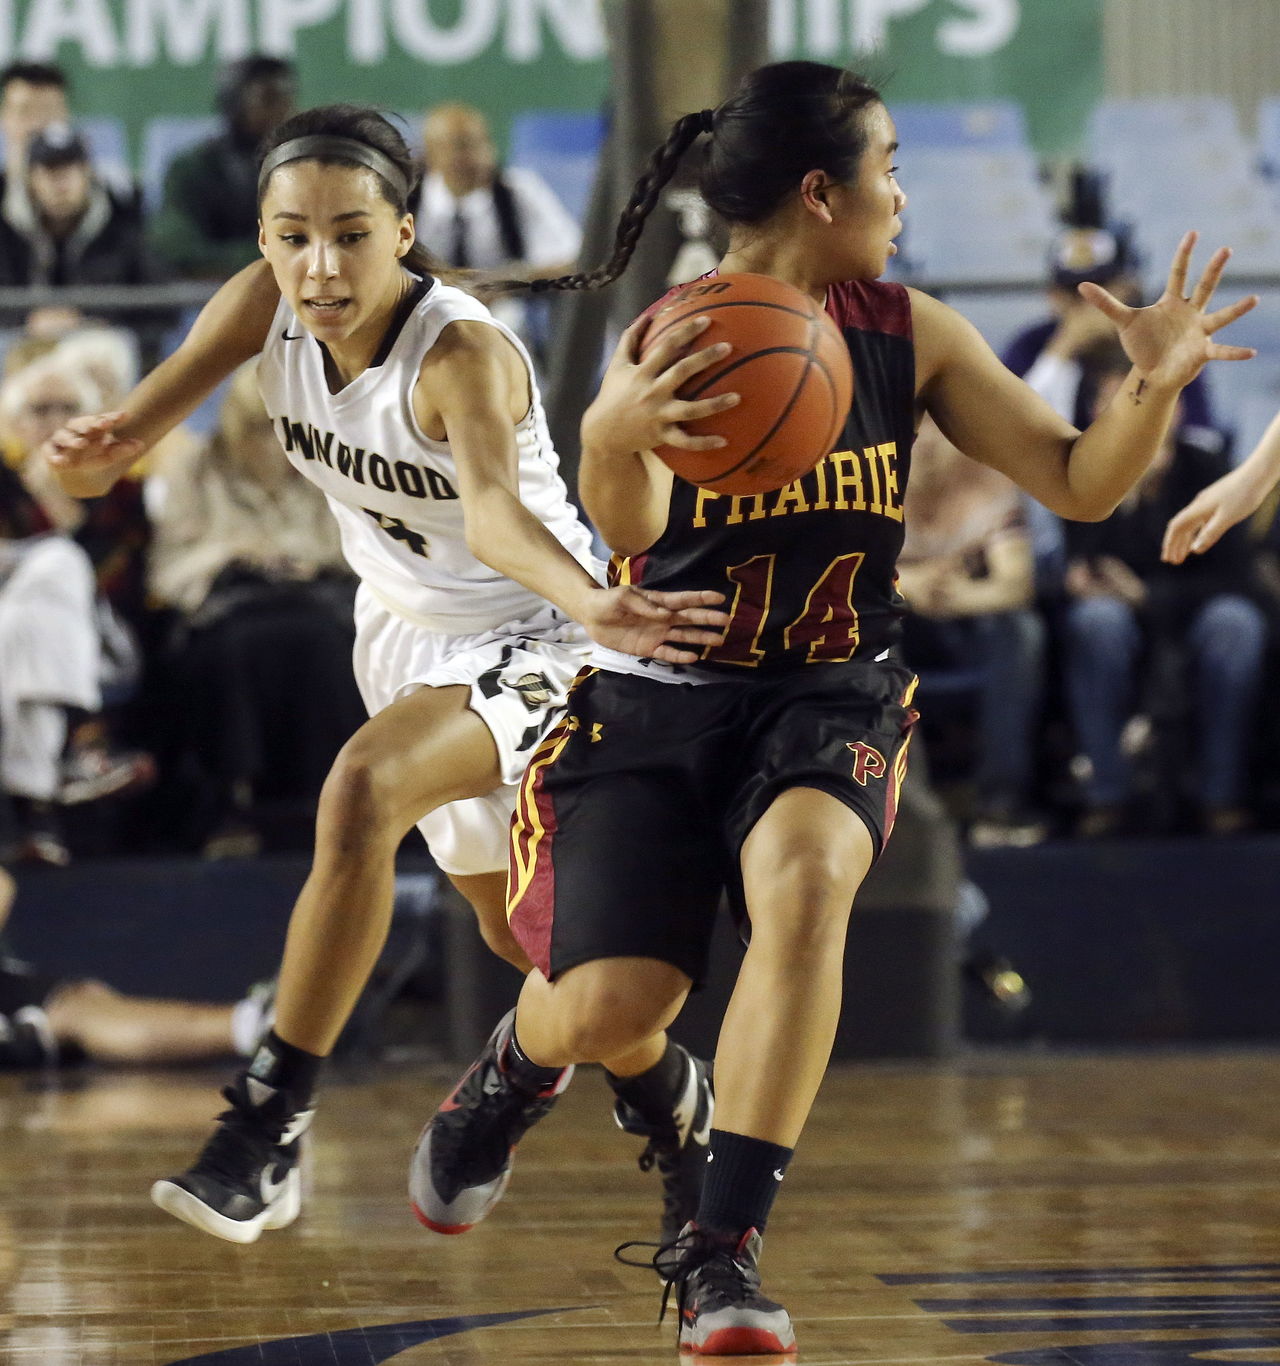 Lynnwood’s Jordyn Edwards attempts to steal from Prairie’s Grace Prom during a 3A state playoff game in Tacoma on Thursday.